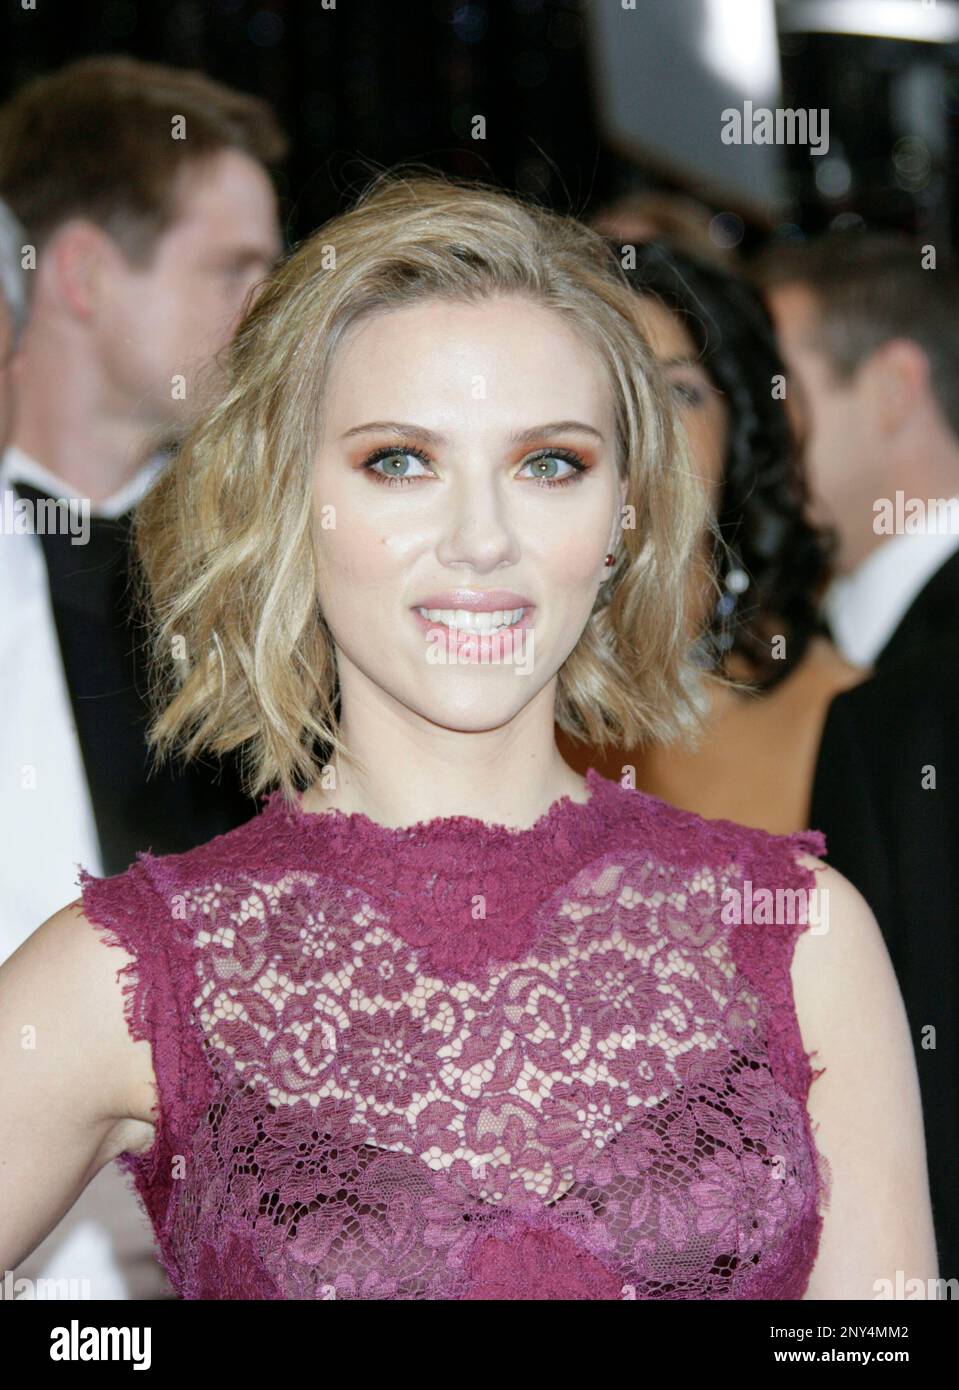 Scarlett Johansson arrives at the 83rd Annual Academy Awards held at the Kodak Theatre on February 27, 2011 in Hollywood, California.  Photo by Francis Specker Stock Photo